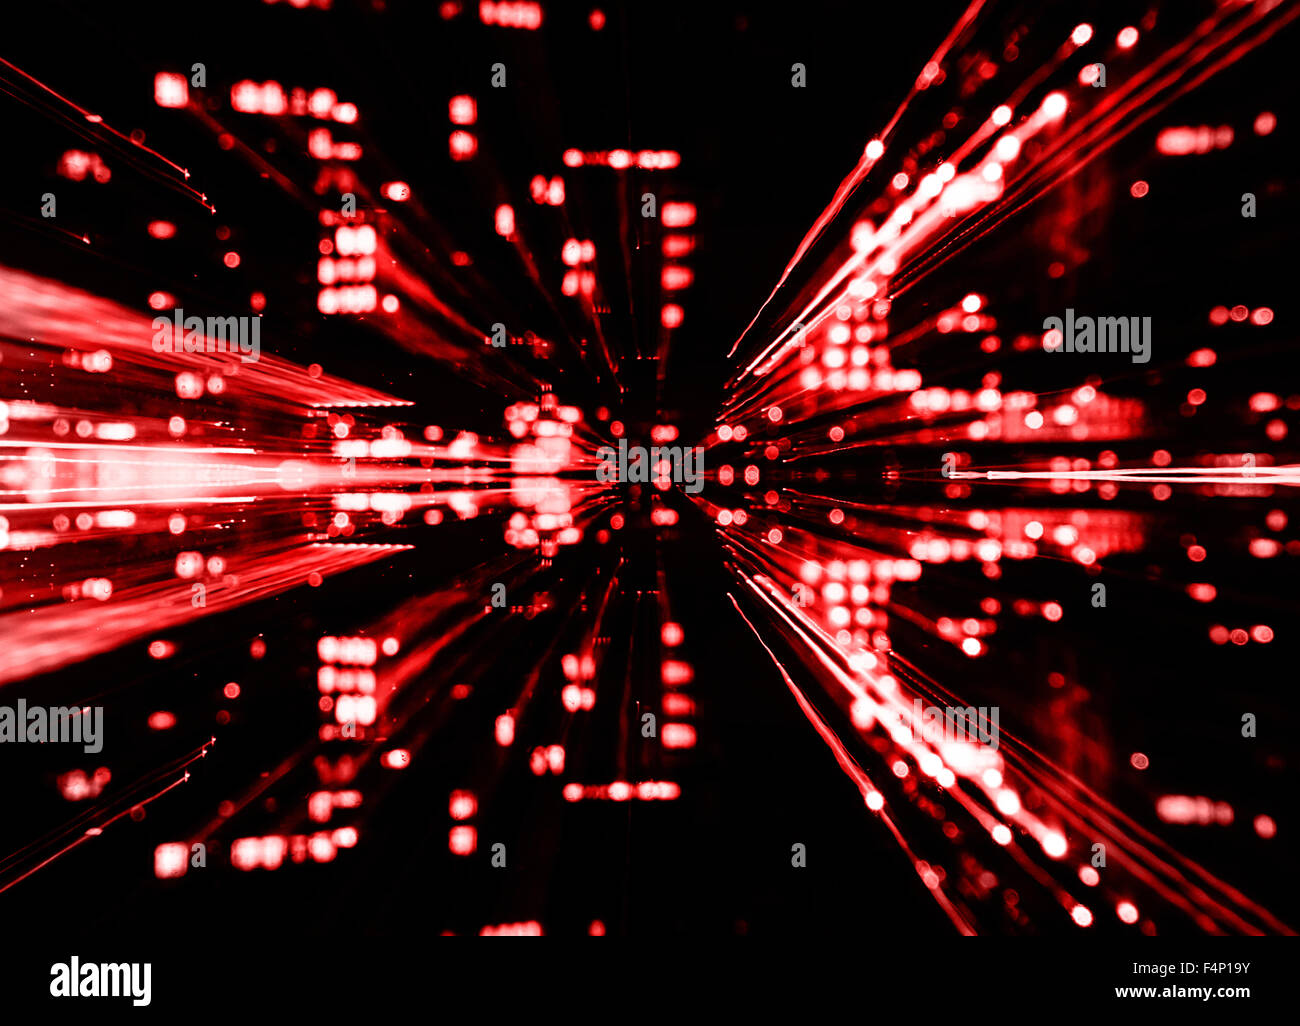 Abstract background in red Stock Photo